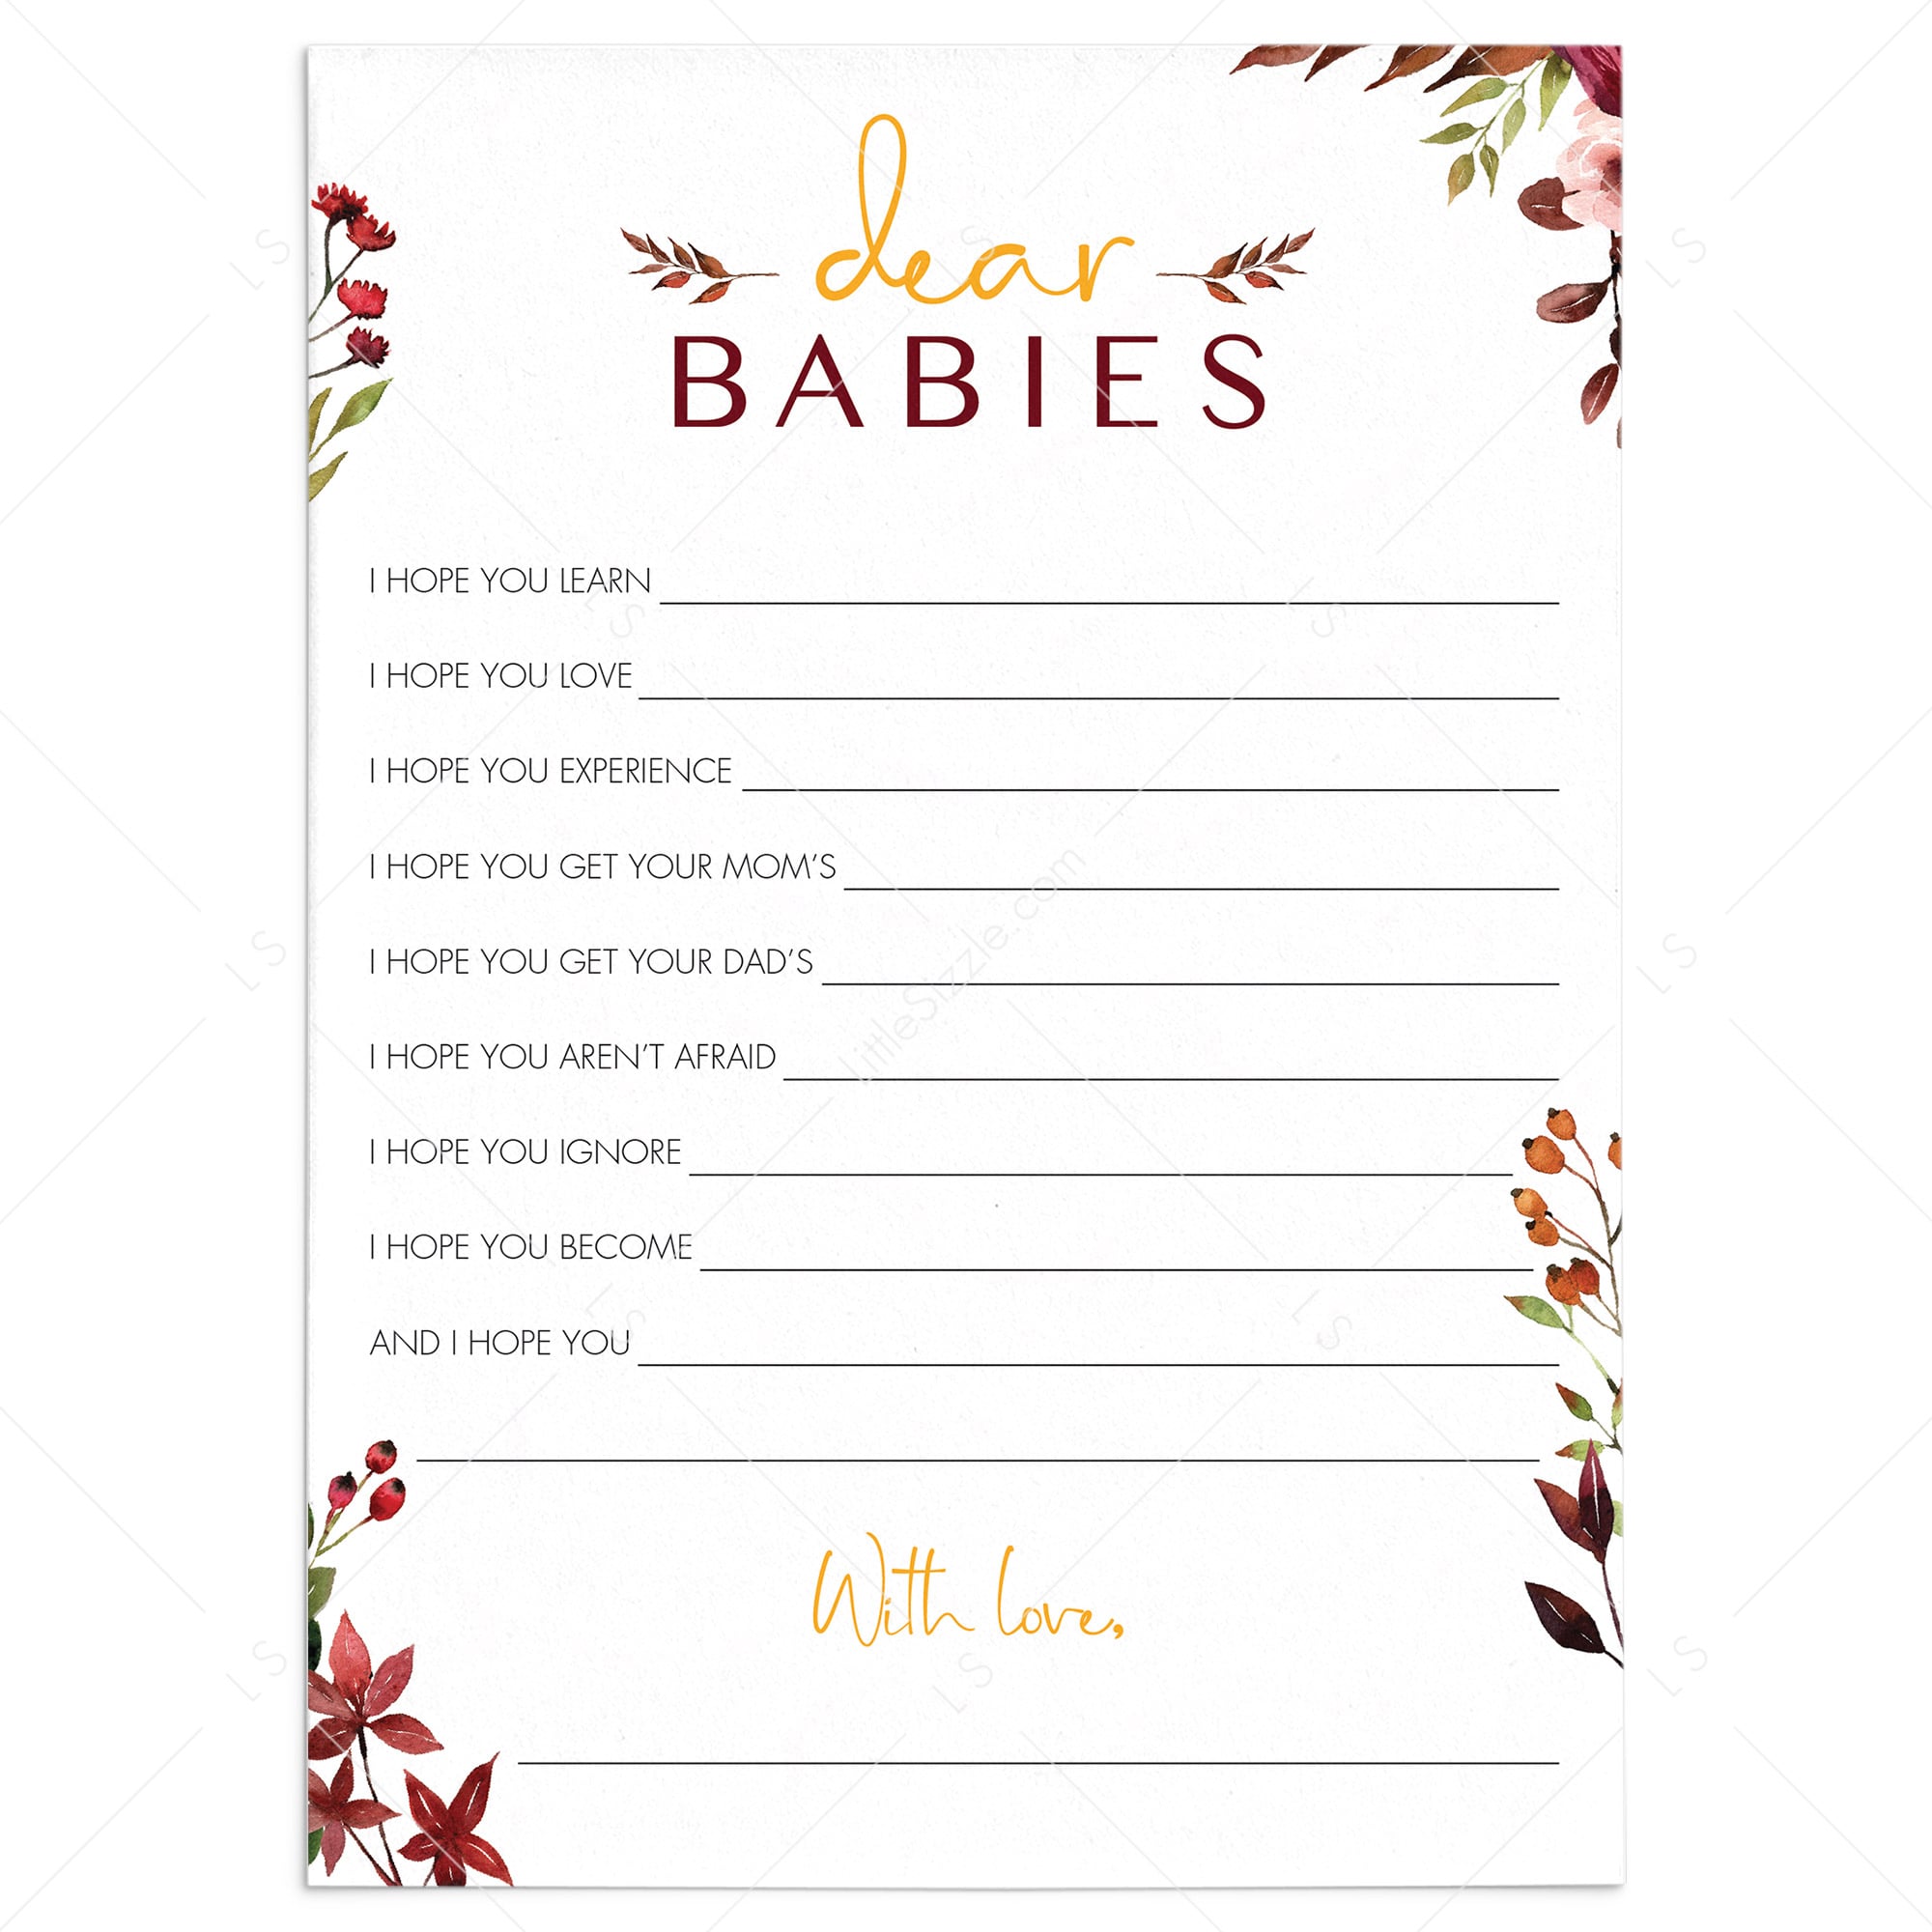 Printable Dear Babies Wishes Card with Burgundy Flowers by LittleSizzle